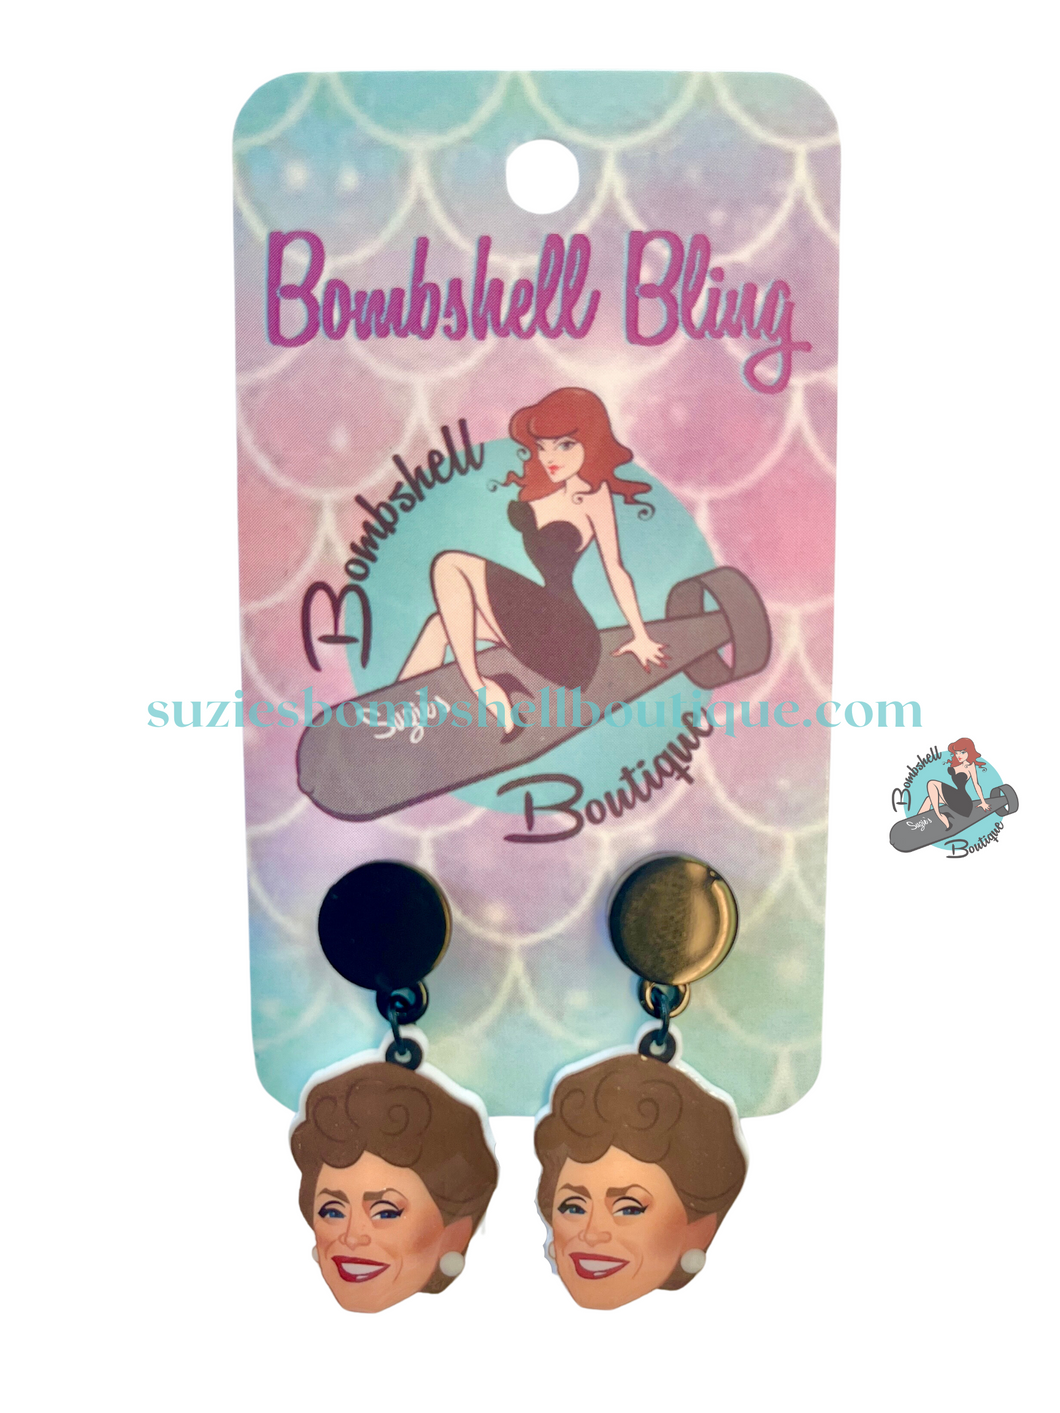 Bombshell Bling Blanche Earrings golden Girls resin costume jewellery novelty 80s nostalgia pinup acrylic earrings Canadian Pin-Up Shop Suzie's Bombshell Boutique